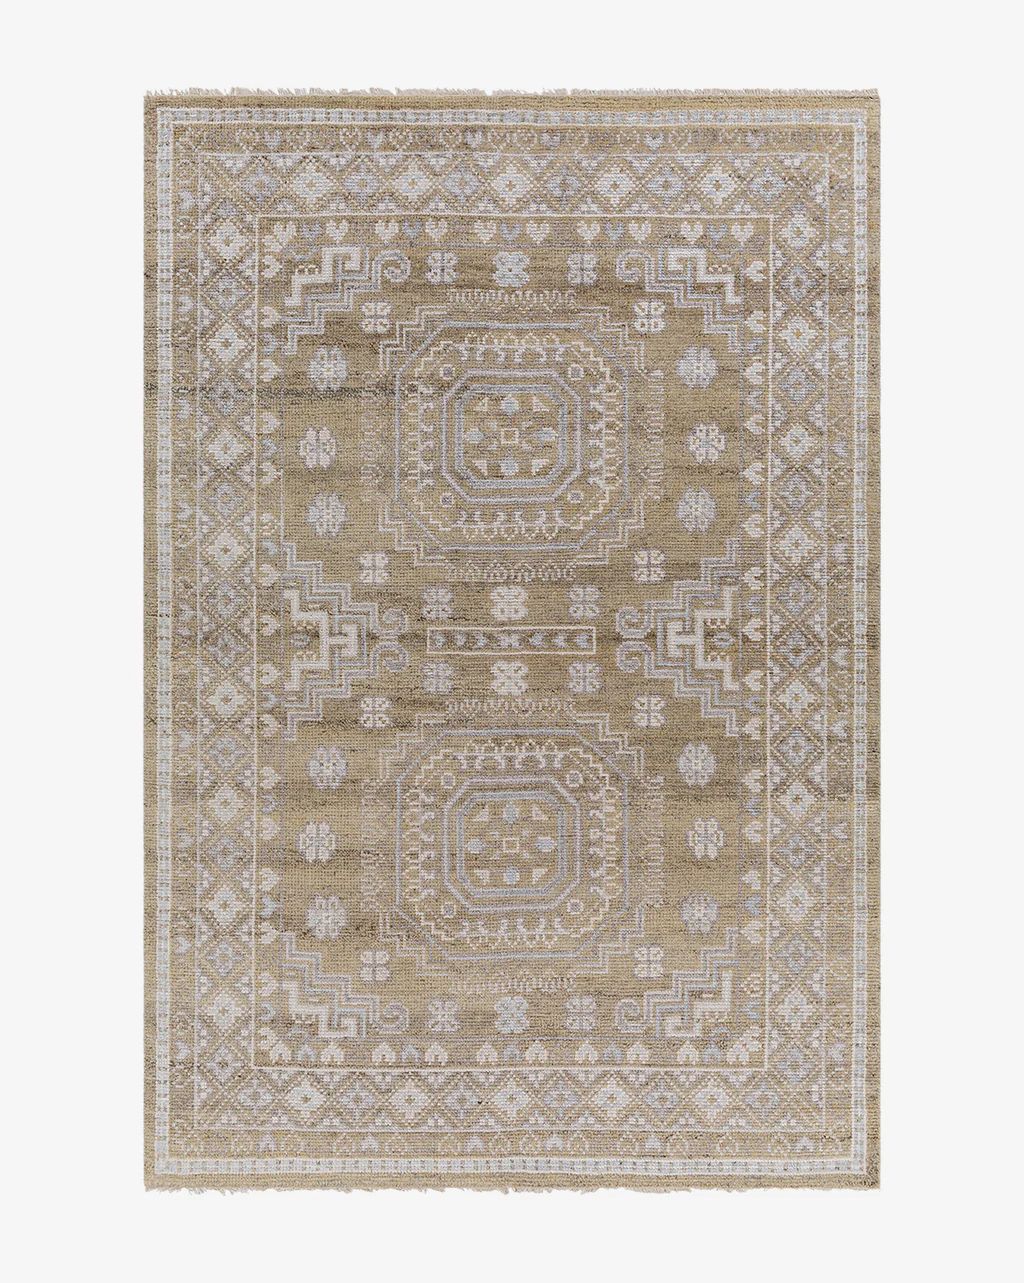 Caru Hand-Knotted Wool Rug | McGee & Co.